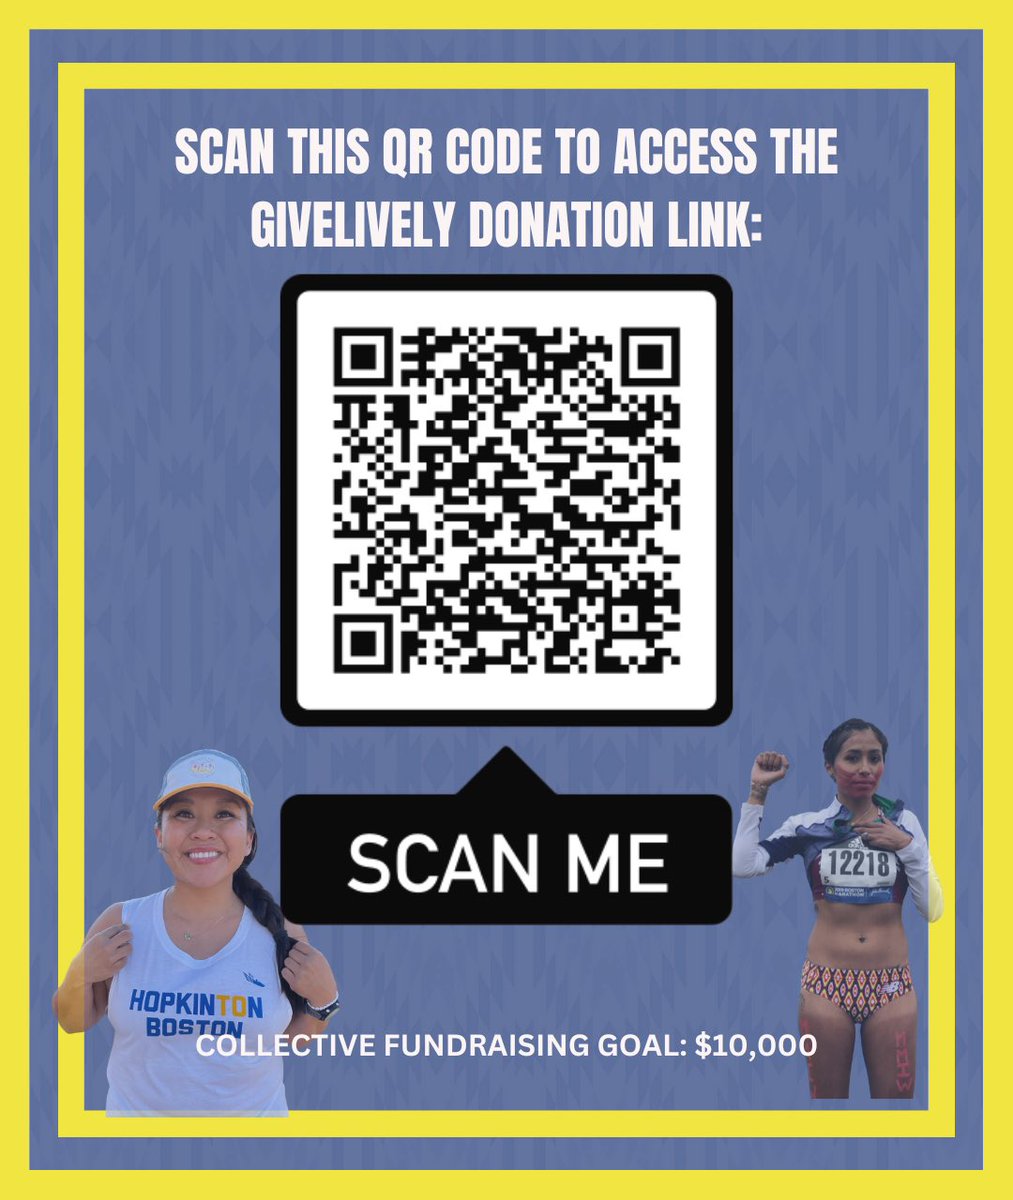 💙💛 Rising Hearts Indigenous Runners + Athlete Advocates are headed to the 127th Boston Marathon! Let’s go Jordan + Kelsey! We have a fundraising goal, $10,000 to support RH programming and stories! Donate / share if you can - much appreciated! 💙💛 secure.givelively.org/donate/livelih…